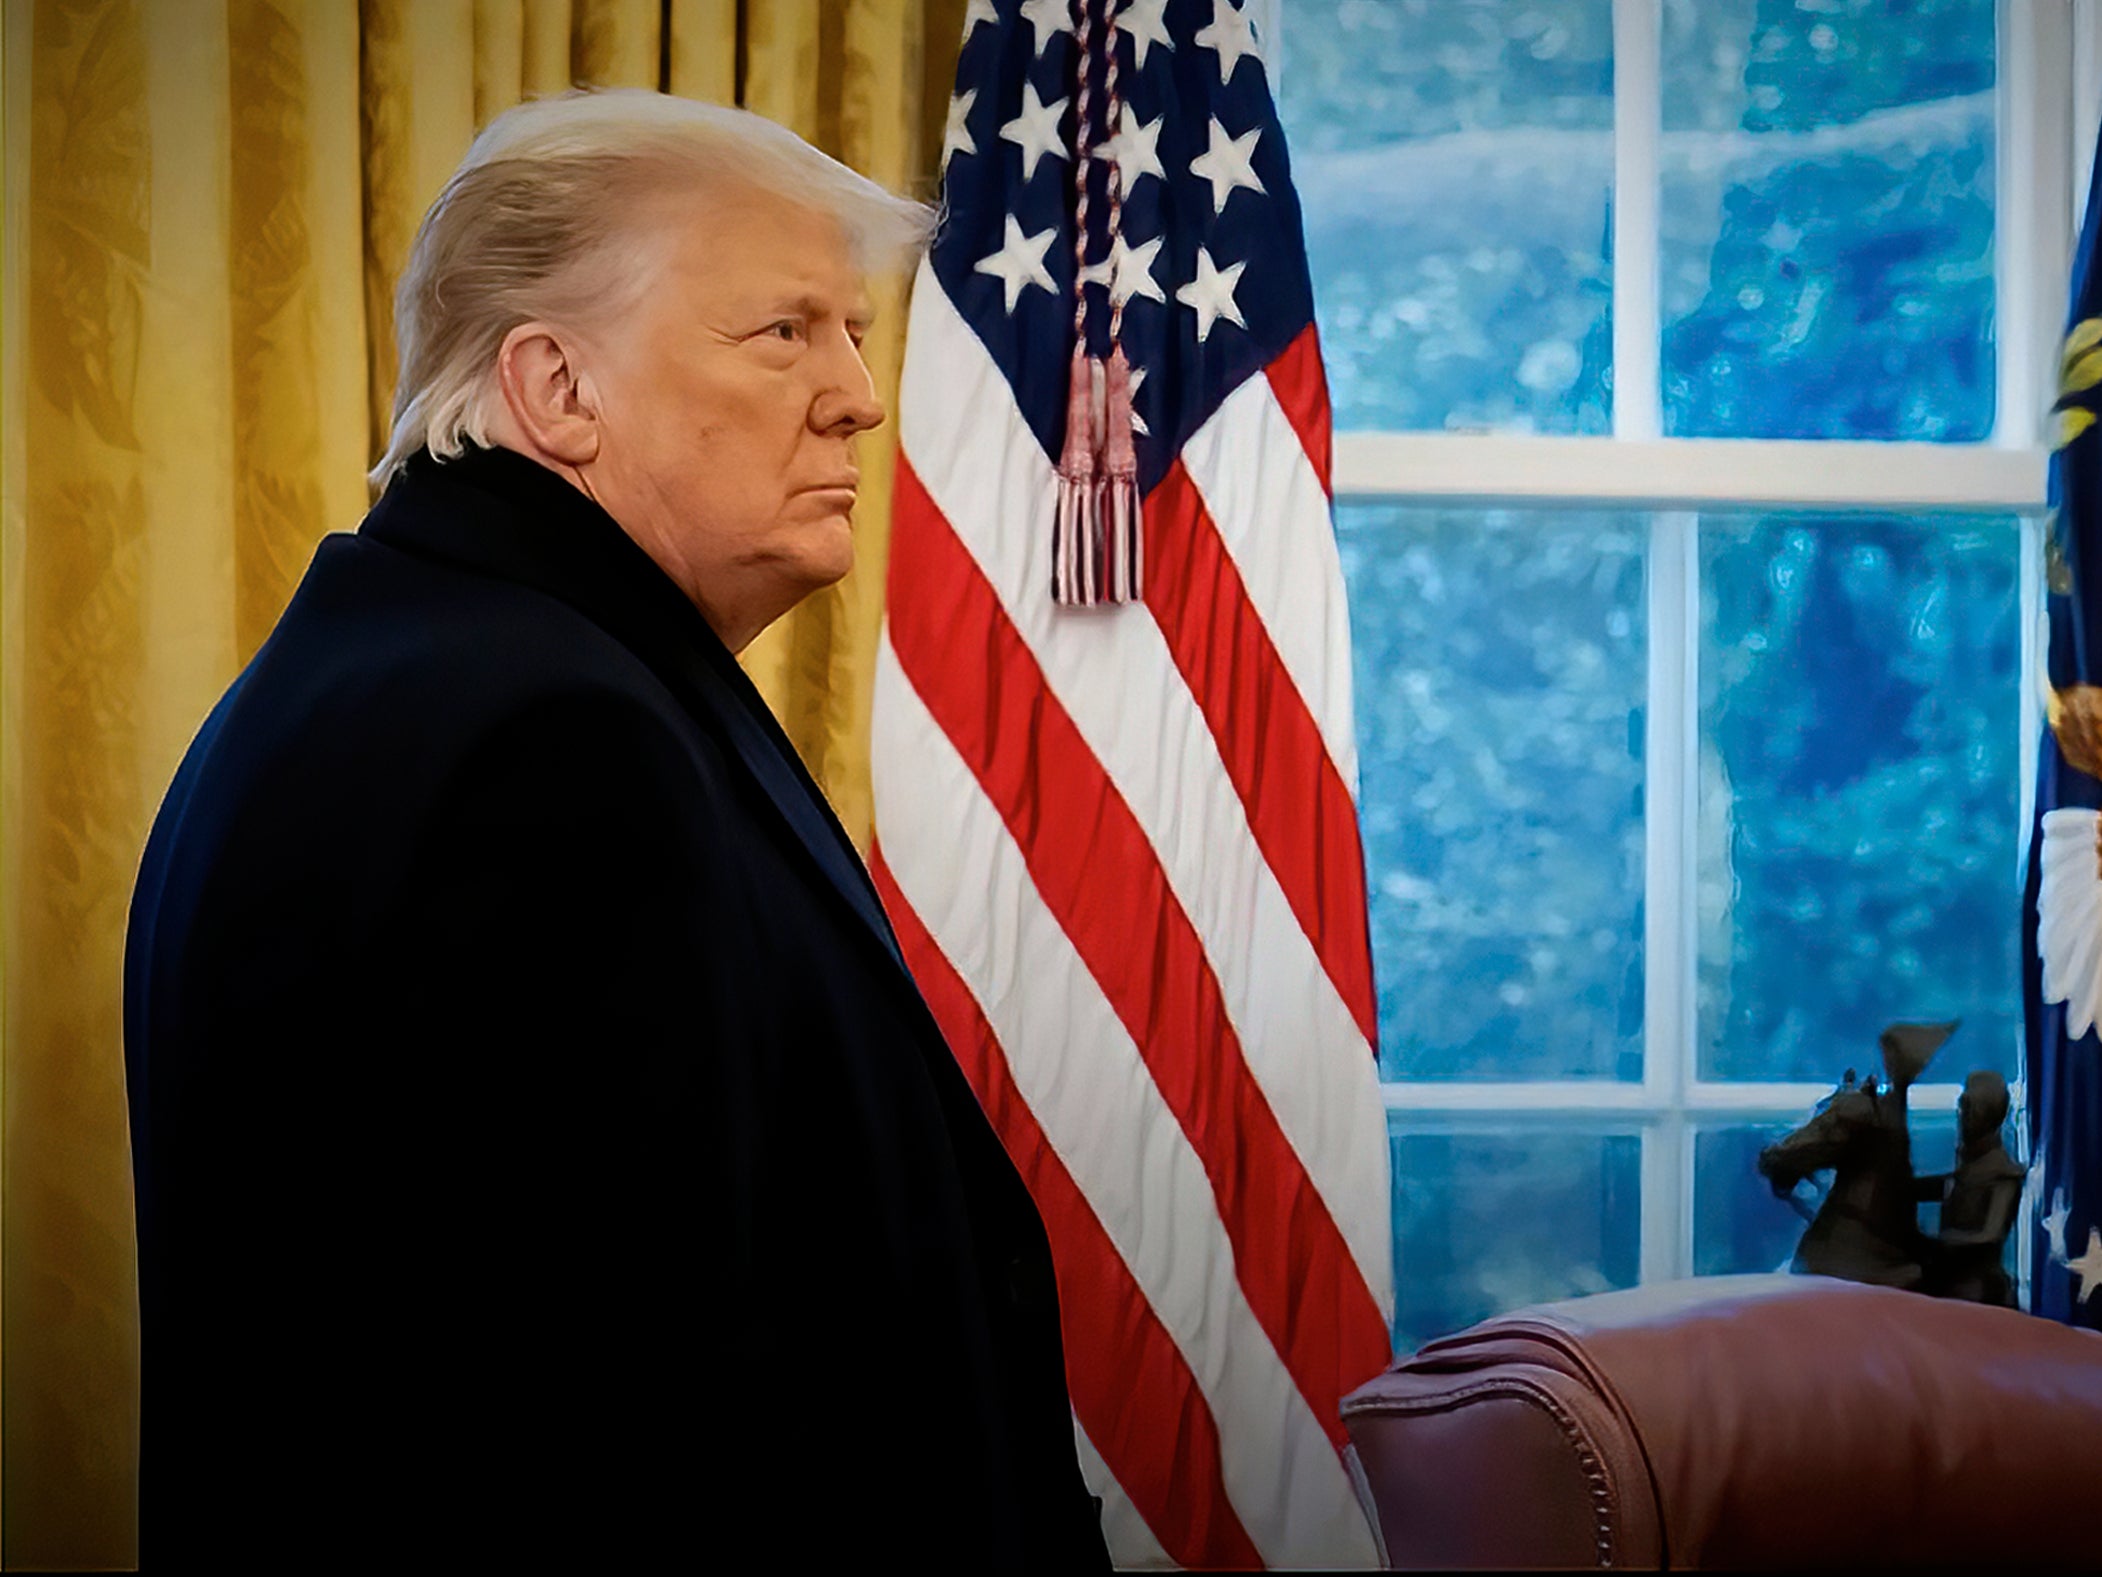 This video screenshot released by the House Select Committee shows then-President Donald Trump with his coat on as he returns to the Oval Office after speaking on the Ellipse on 6 January, 2021